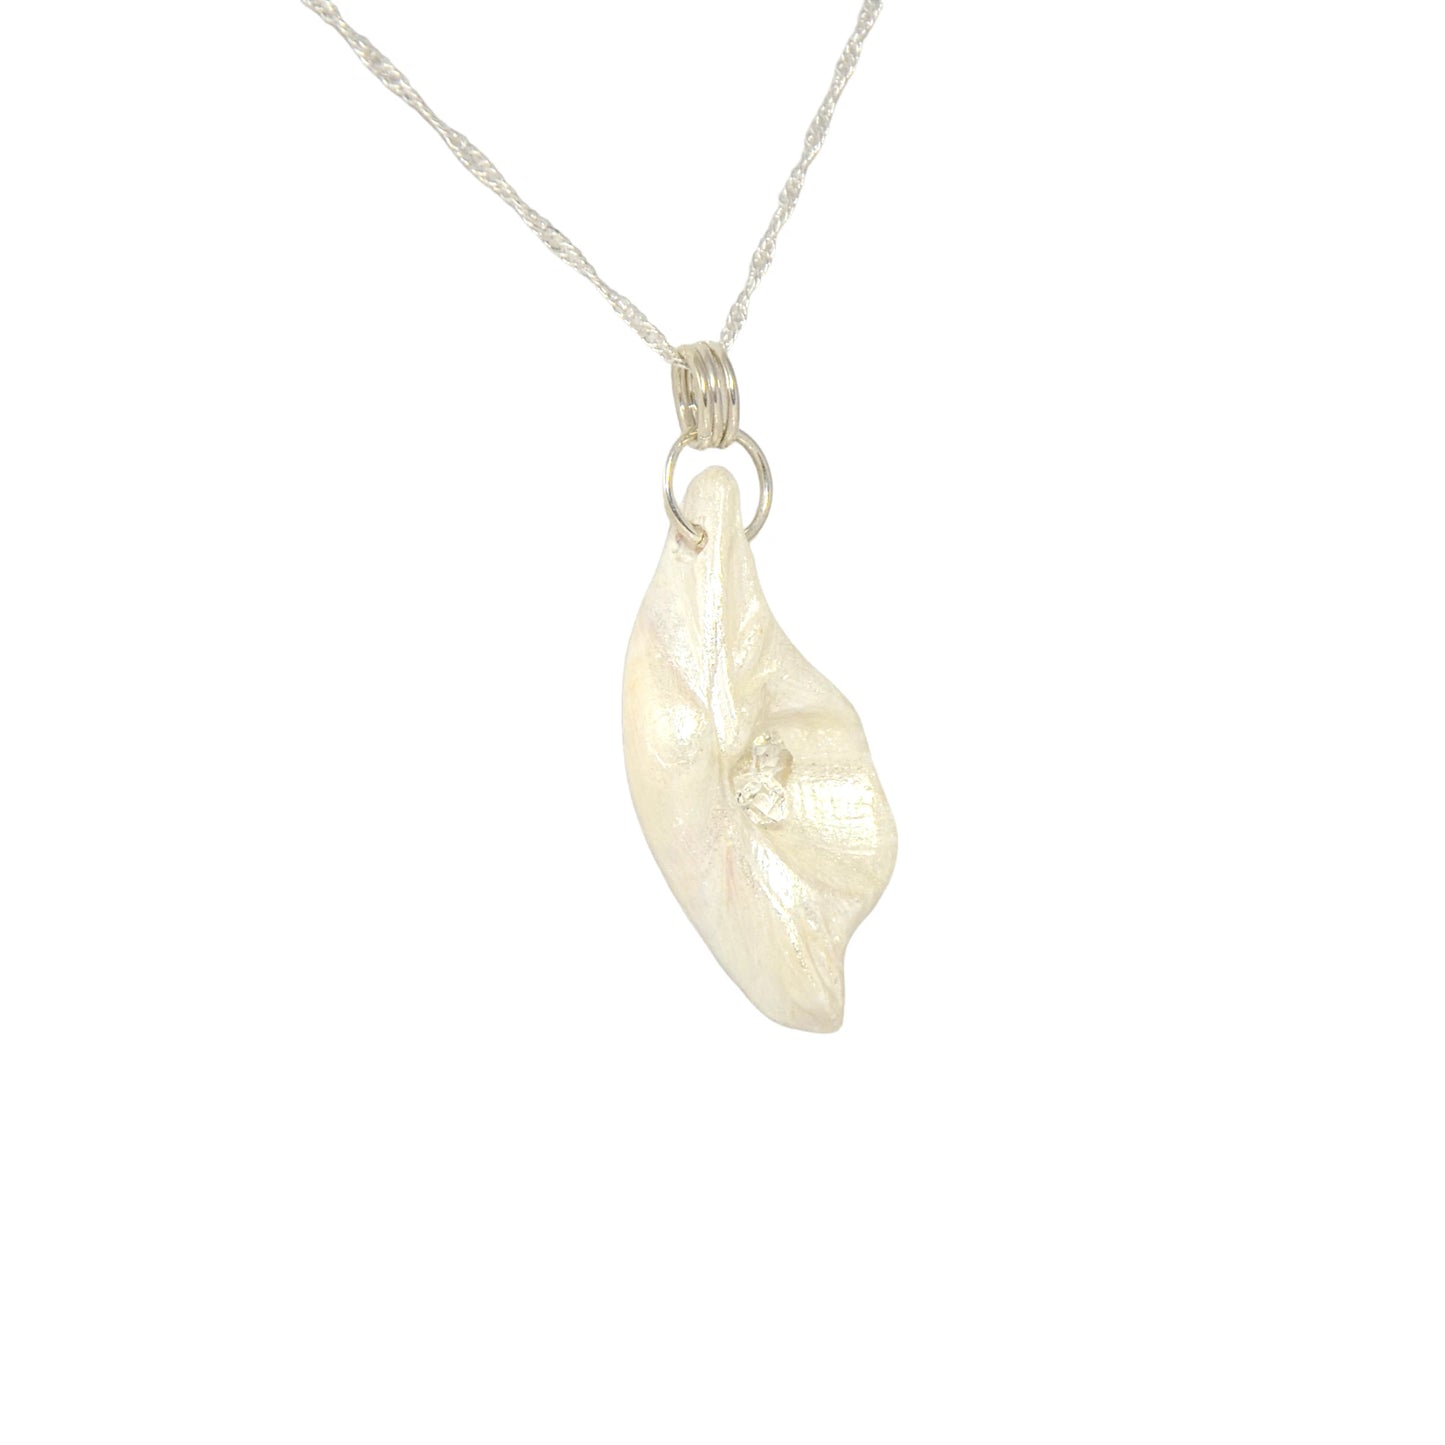 Halo natural seashell pendant with three herkimer diamonds. The pendant is shown turned so the viewer can see the right side of the pendant.